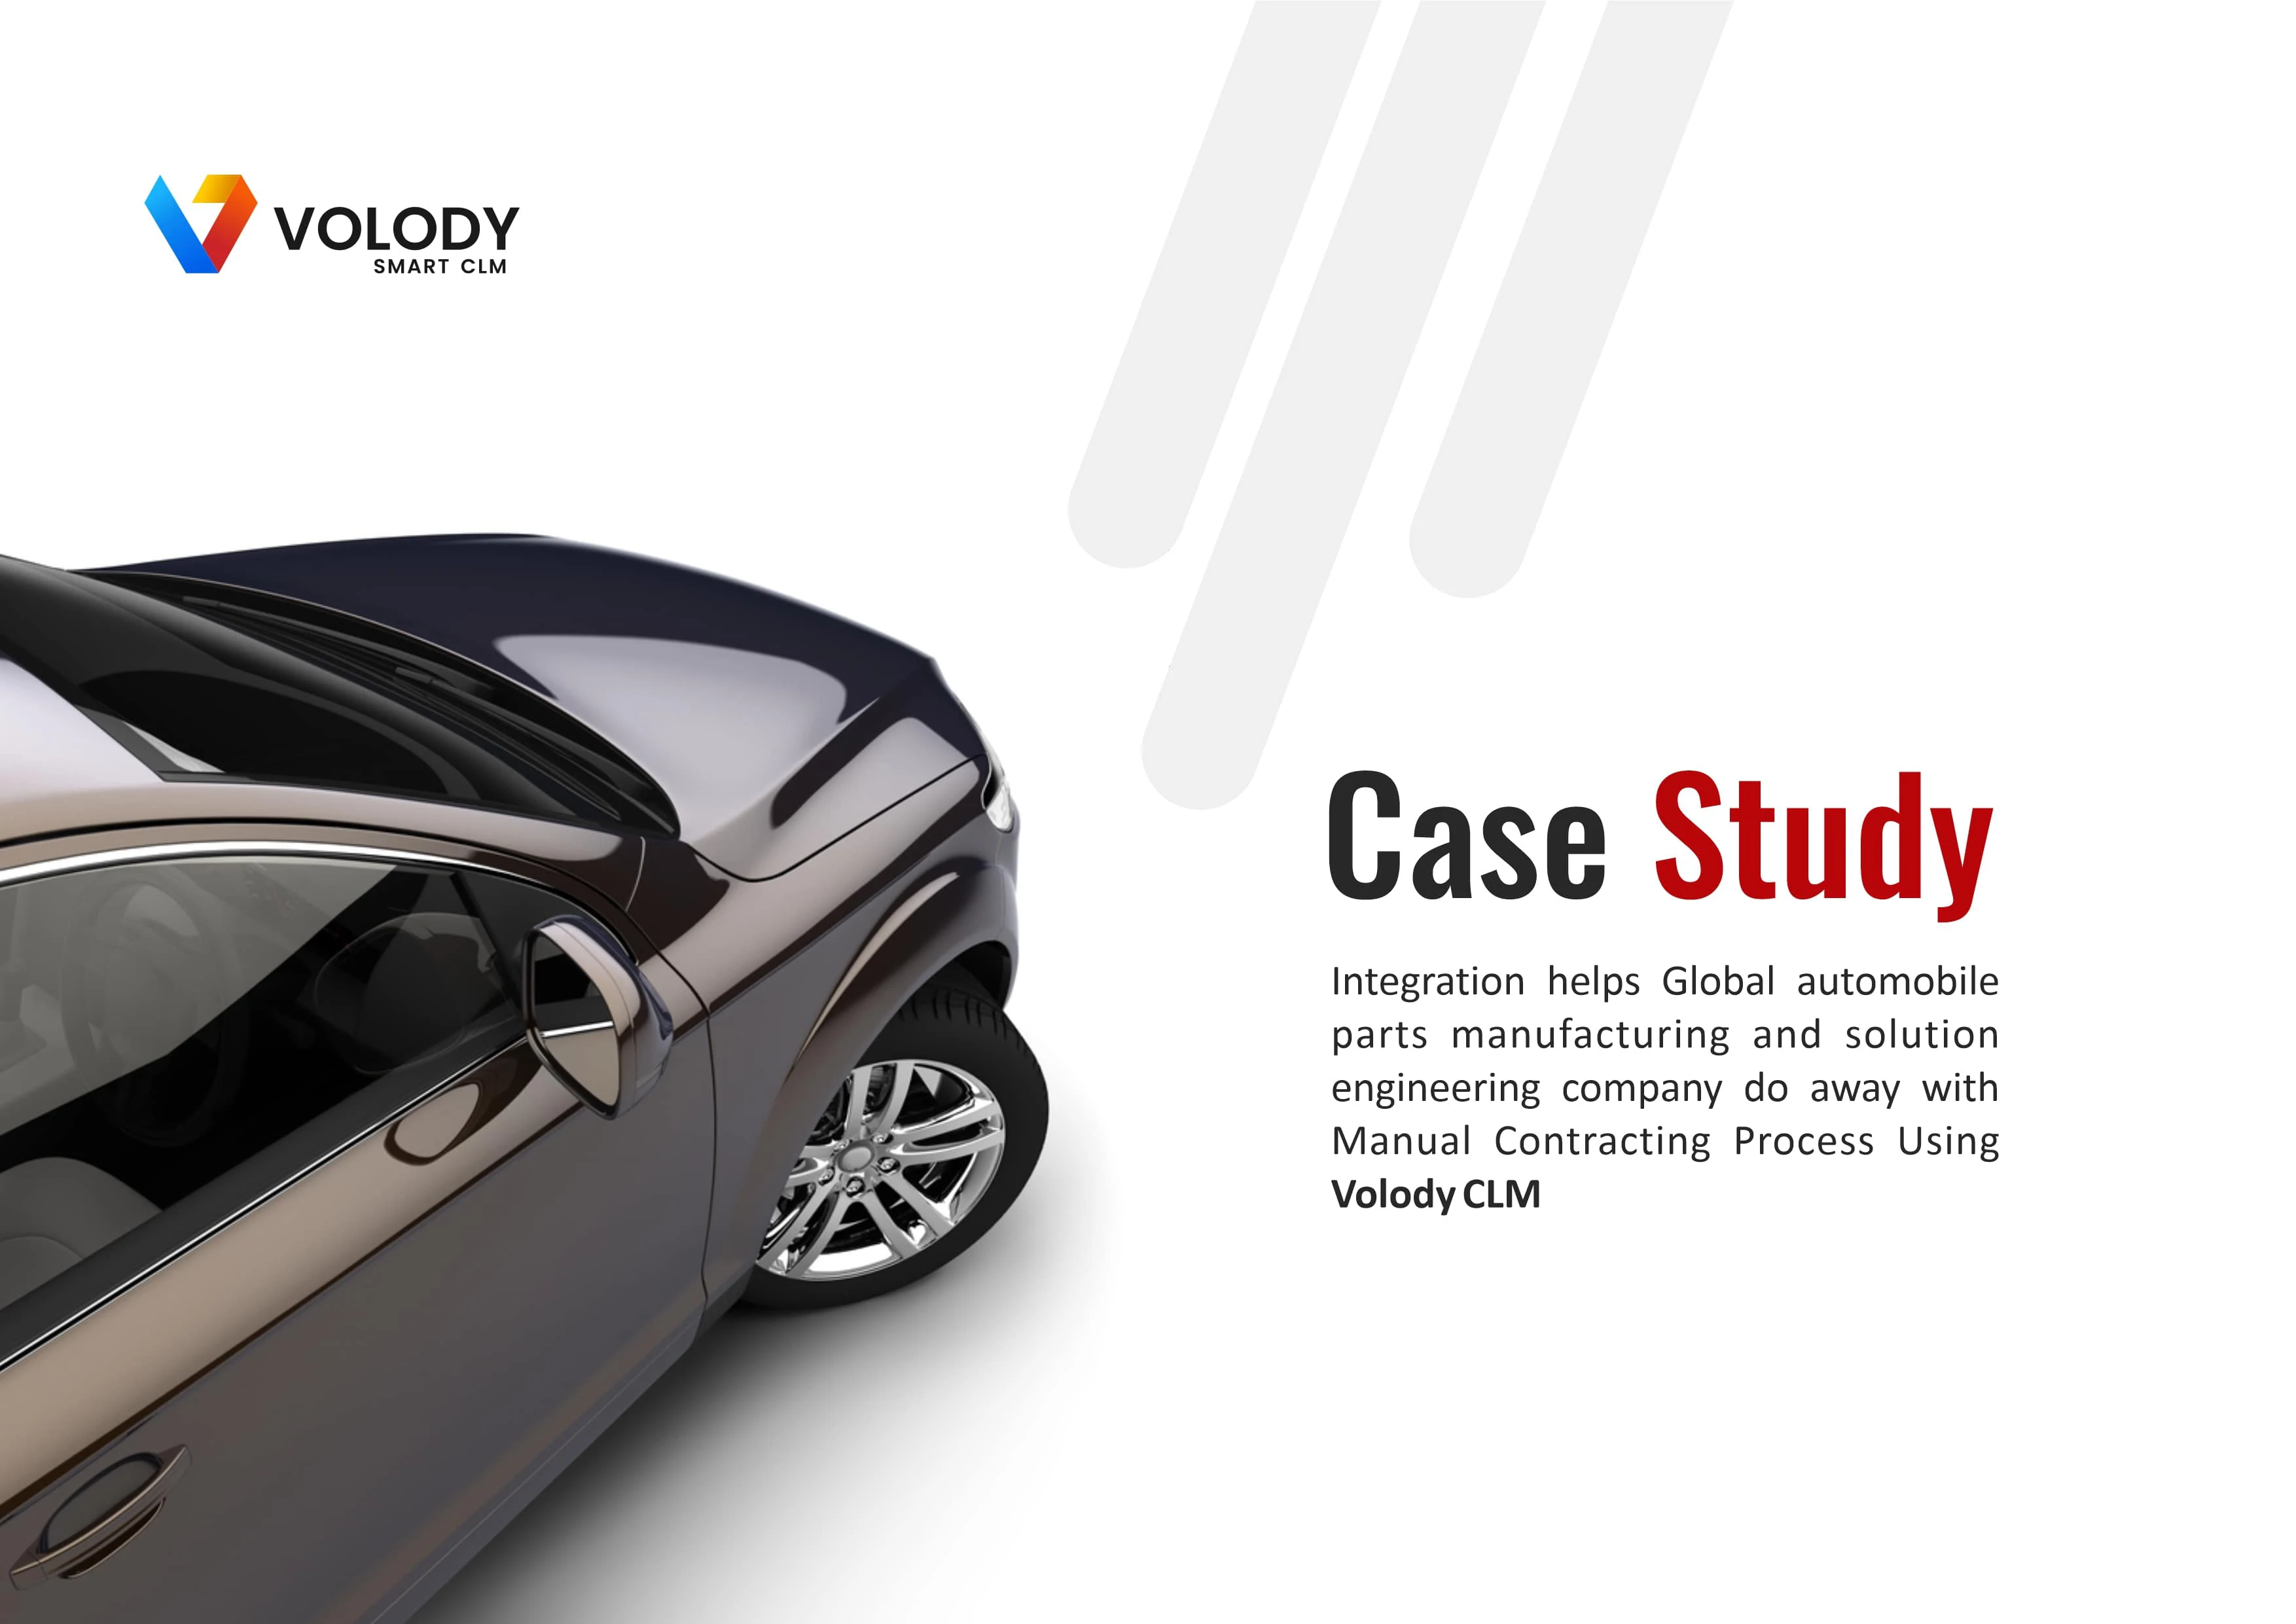 Volody’s smart clm helps global automobile parts manufacturer do away with manual contracting process